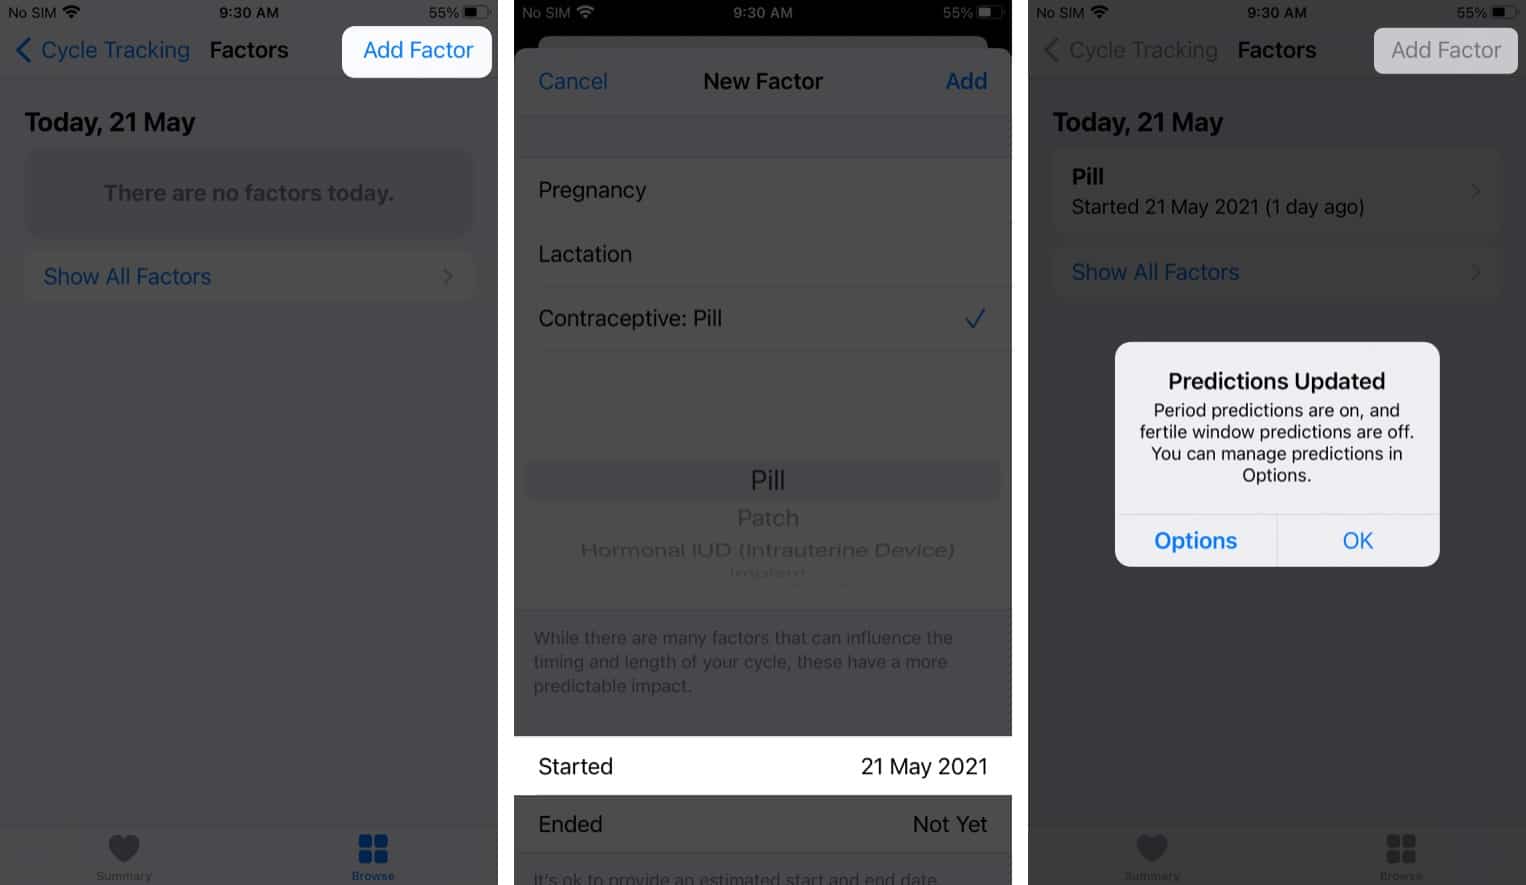 Add a factor to manage cycle factors on iPhone